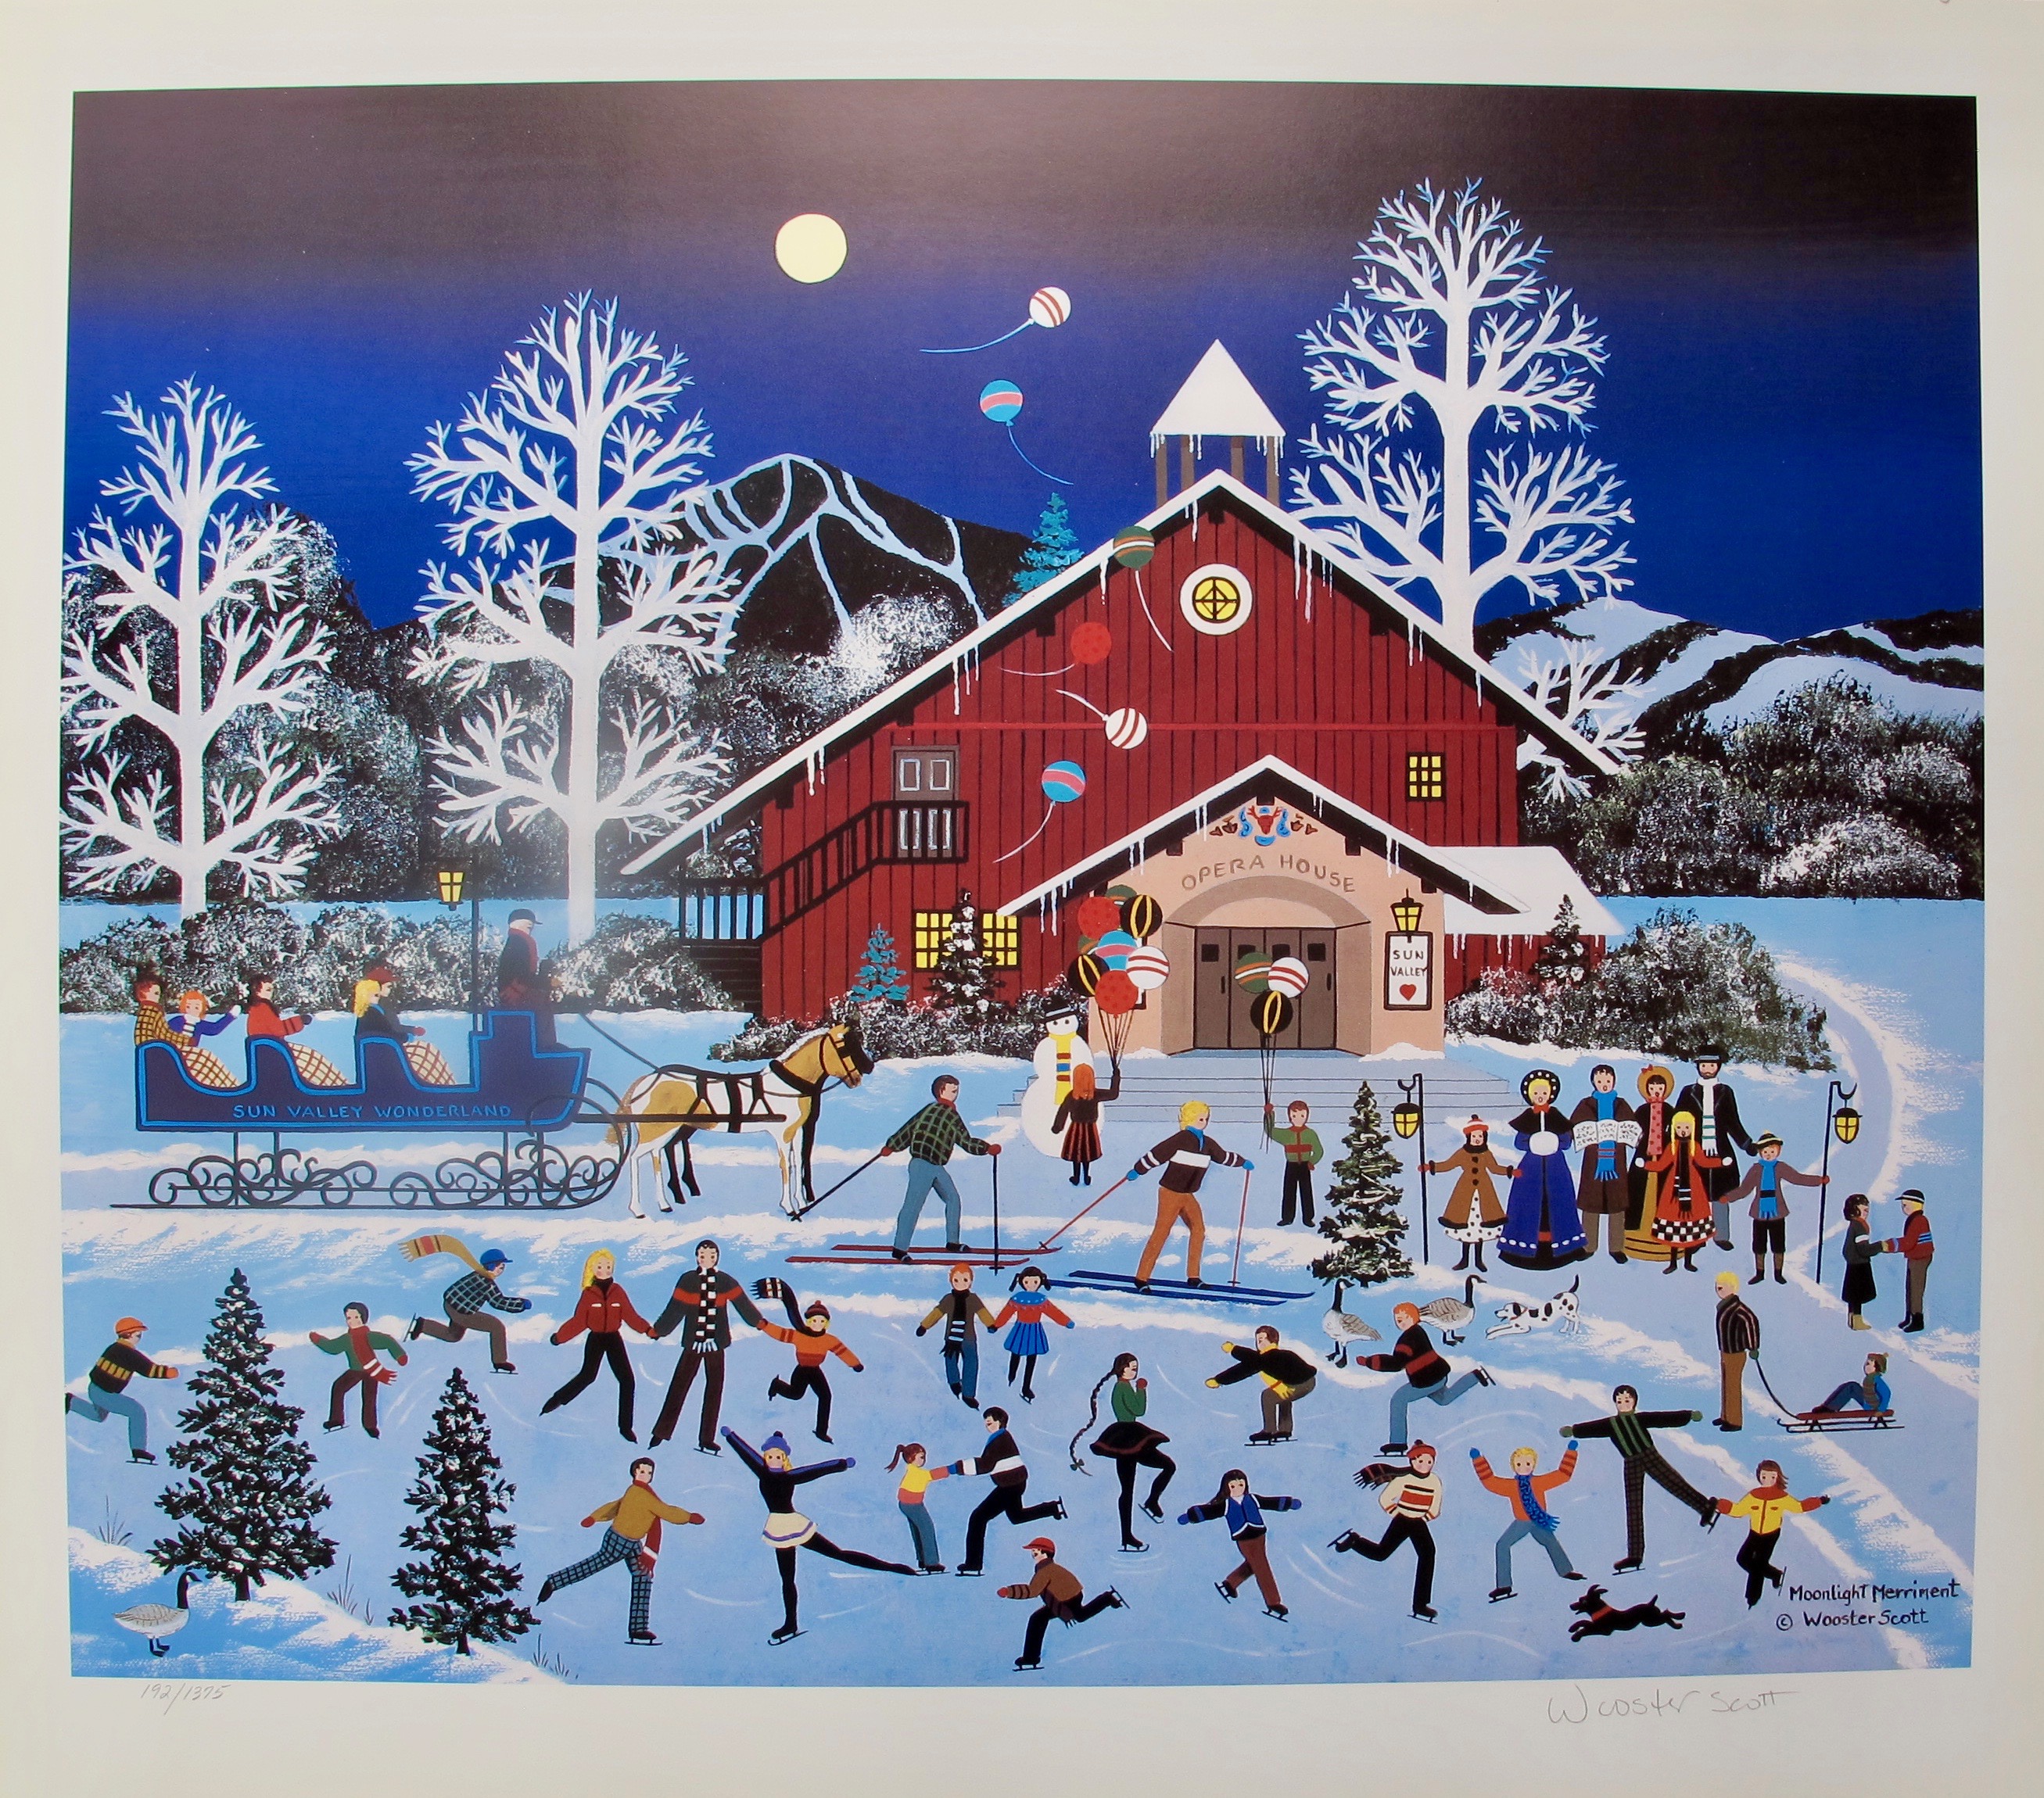 Jane Wooster Scott MOONLIGHT MERRIMENT Hand Signed Limited Edition Lithograph